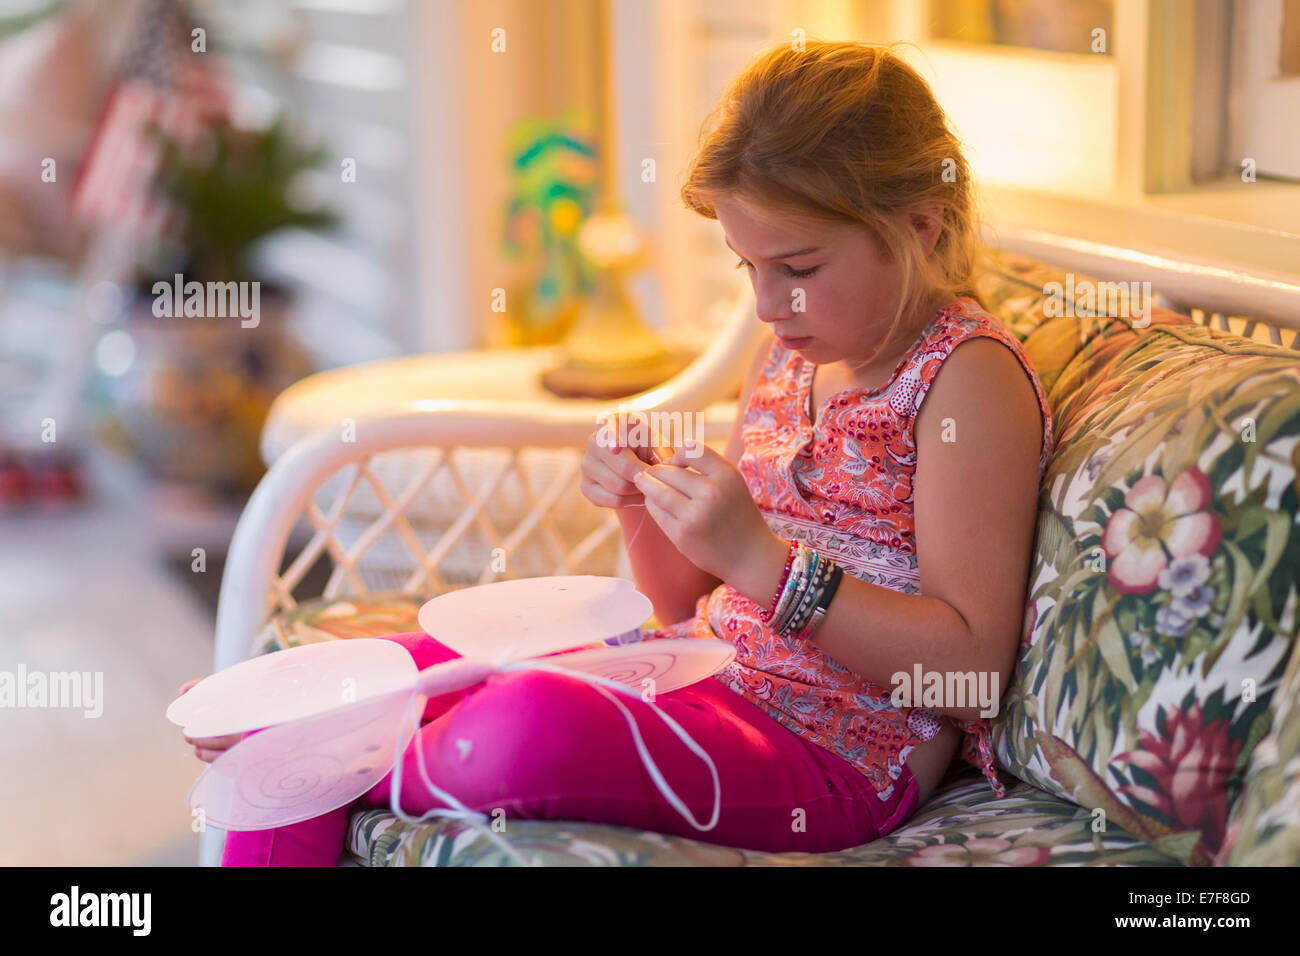 Caucasian girl sewing fairy wings on sofa Stock Photo